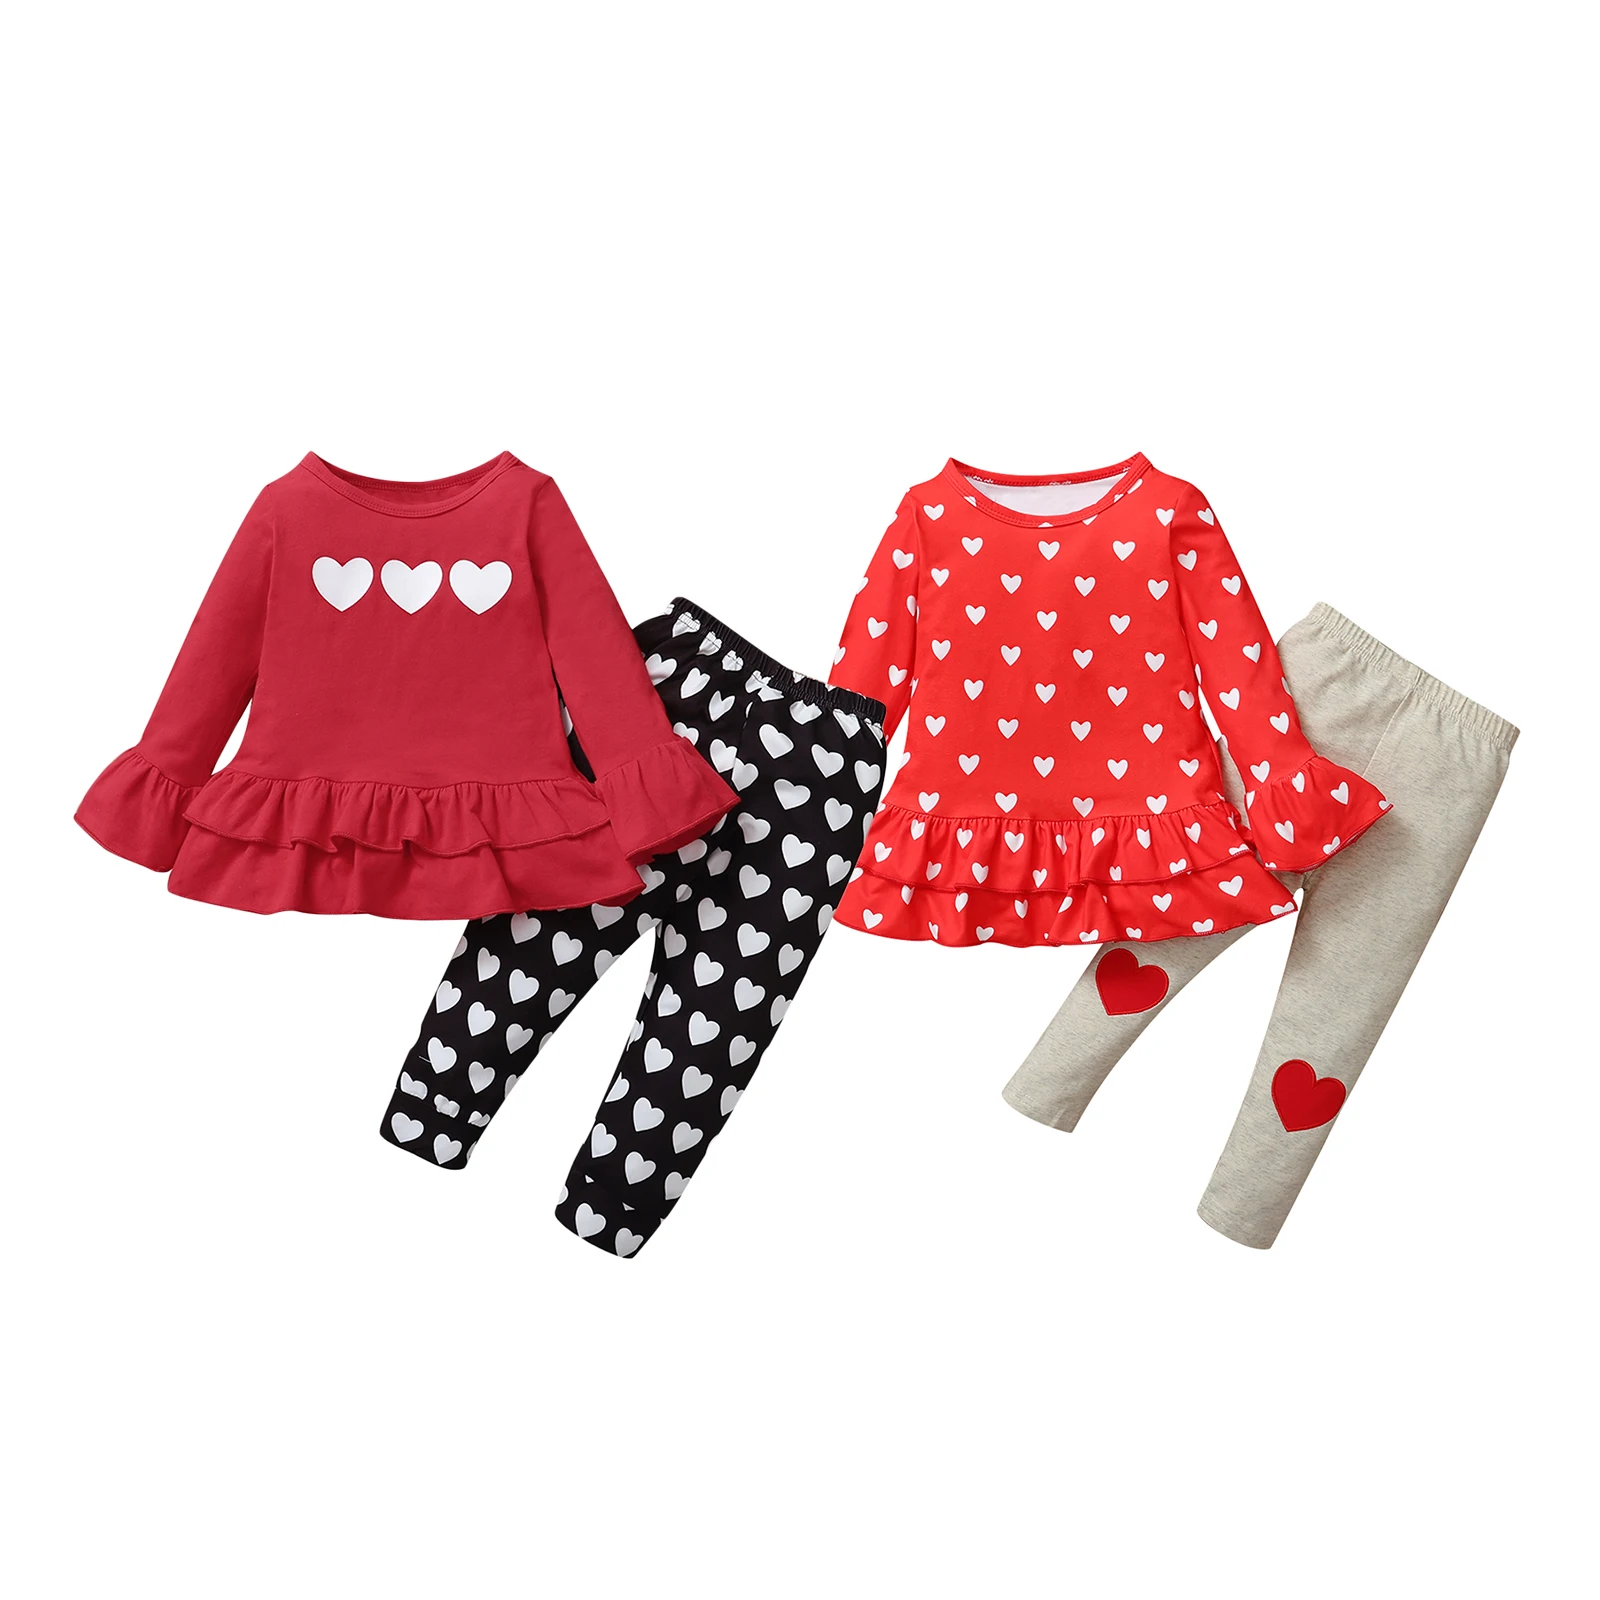 2PCS Toddler Kids Baby Girls Long Sleeve Tops Dress Pants Valentine Outfits Sets 